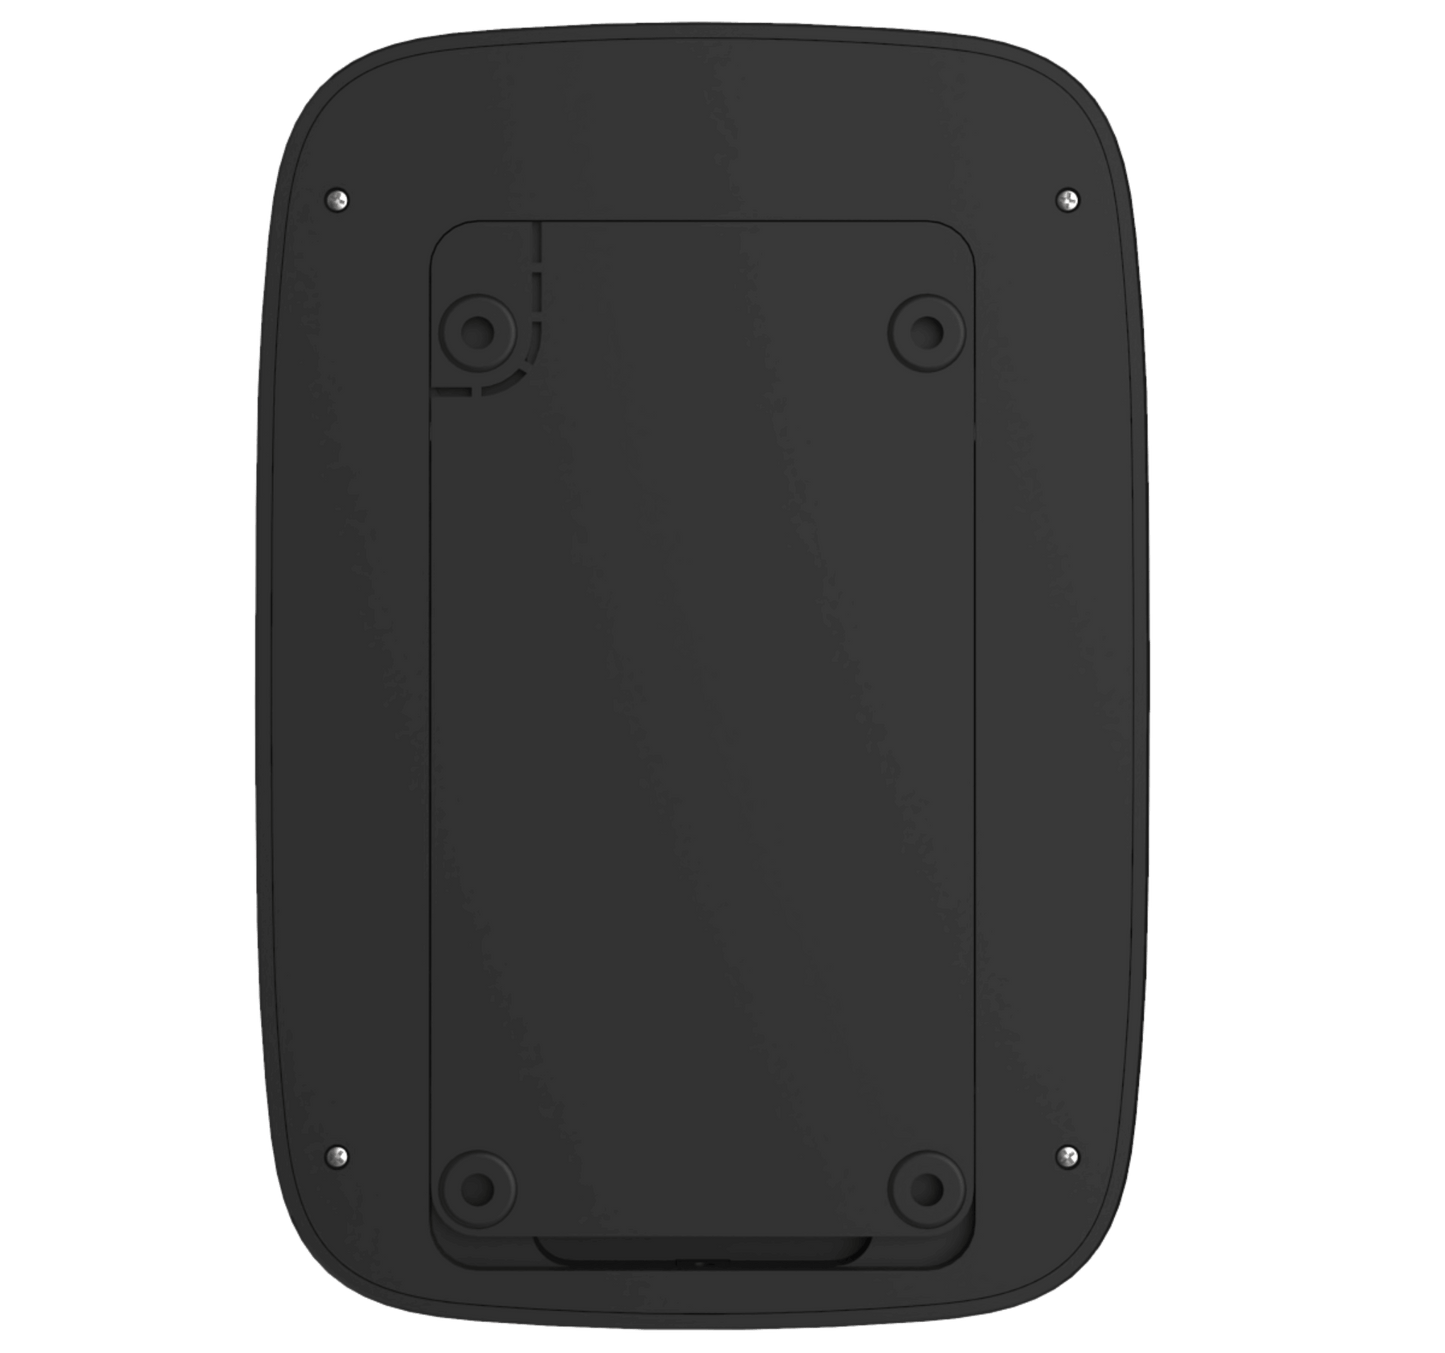 Black Ajax KeyPad Plus a wireless touch keypad for home security, 165 × 113 × 20 mm in size, 267 grams in weight. used for the the Ajax security system, back view of device